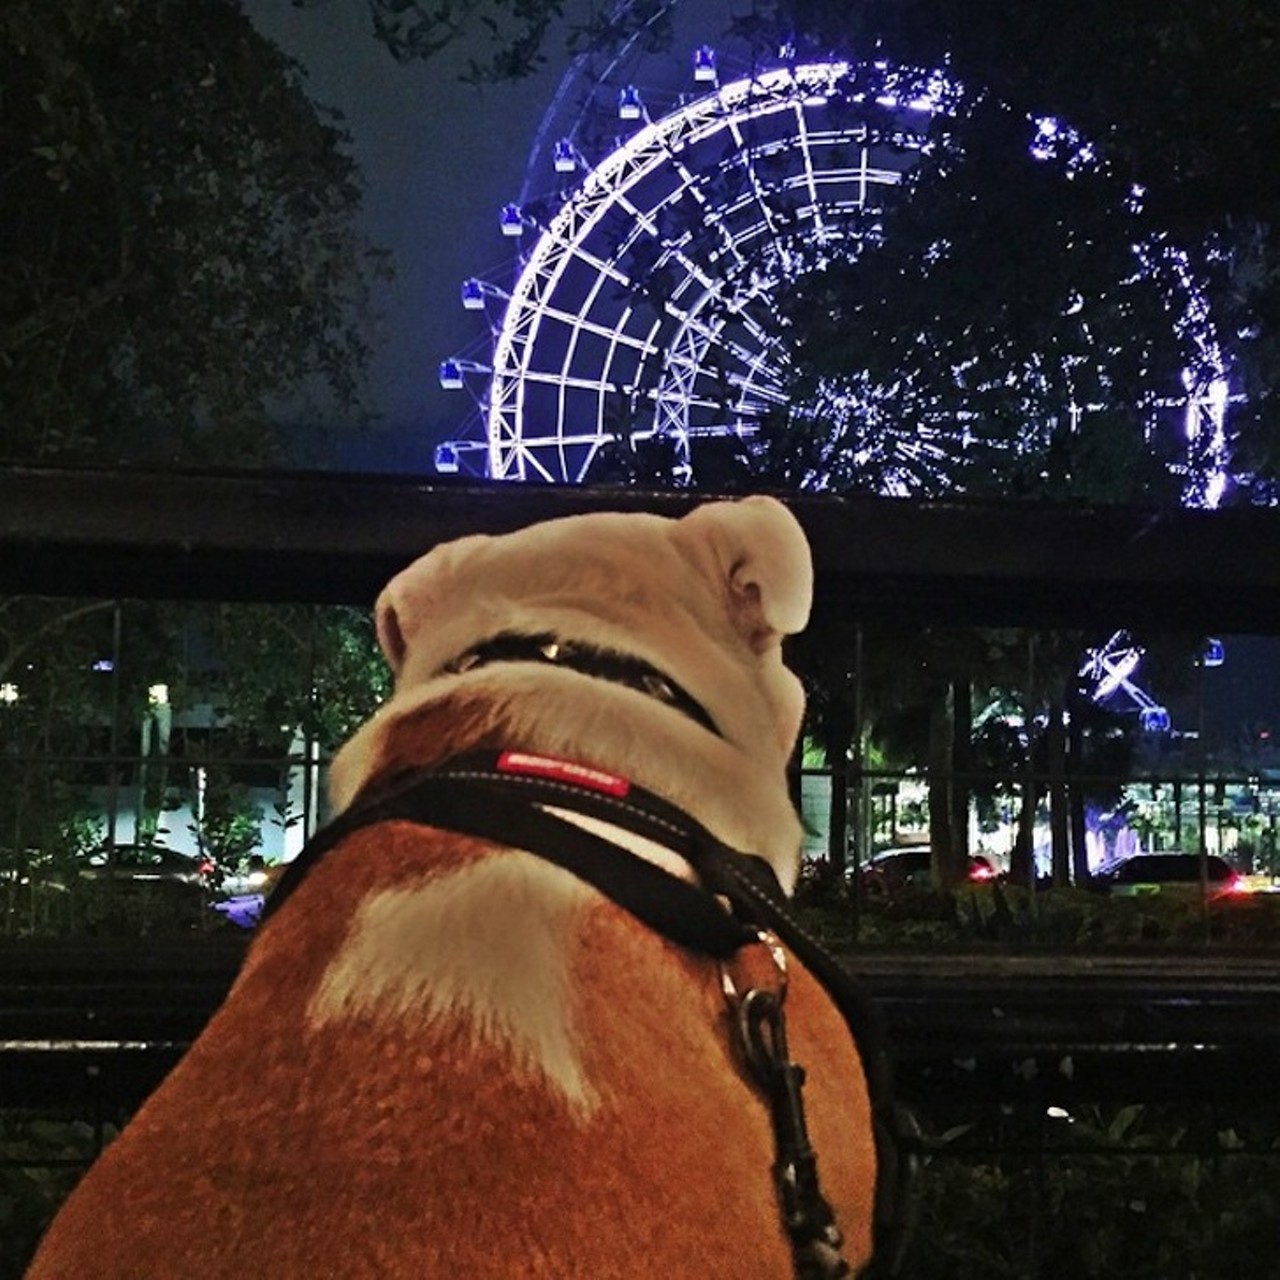 Brick House Tavern & Tap
8440 International Drive | 704-987-2022
Sneak Fido a couple of meatballs while you relax with a cold draft at this local favorite with a great of the Orlando Eye.
Photo via starkthebulldog/Instagram